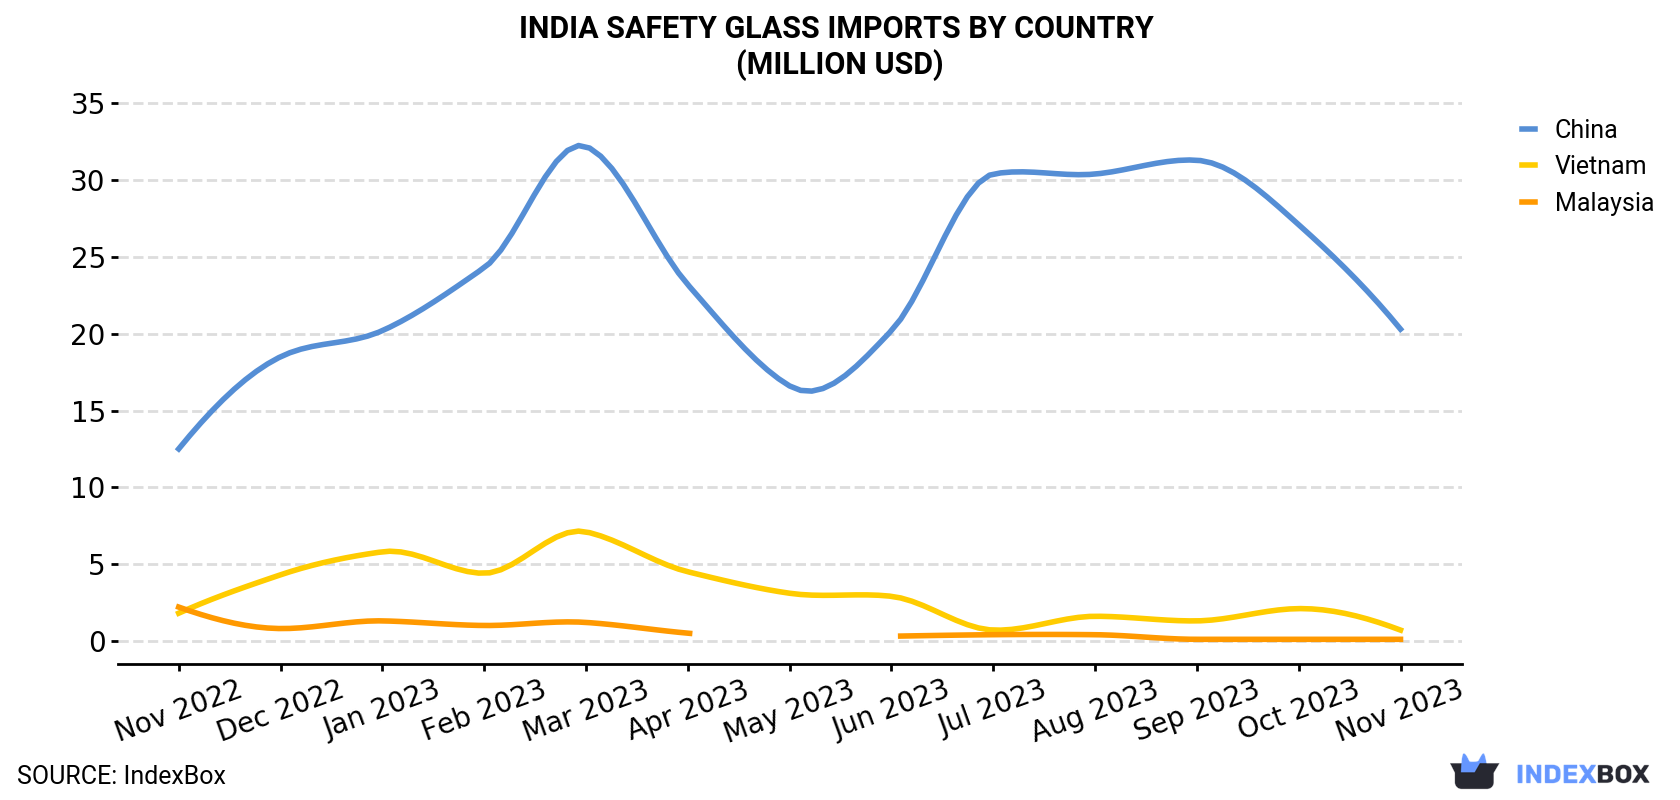 India Safety Glass Imports By Country (Million USD)